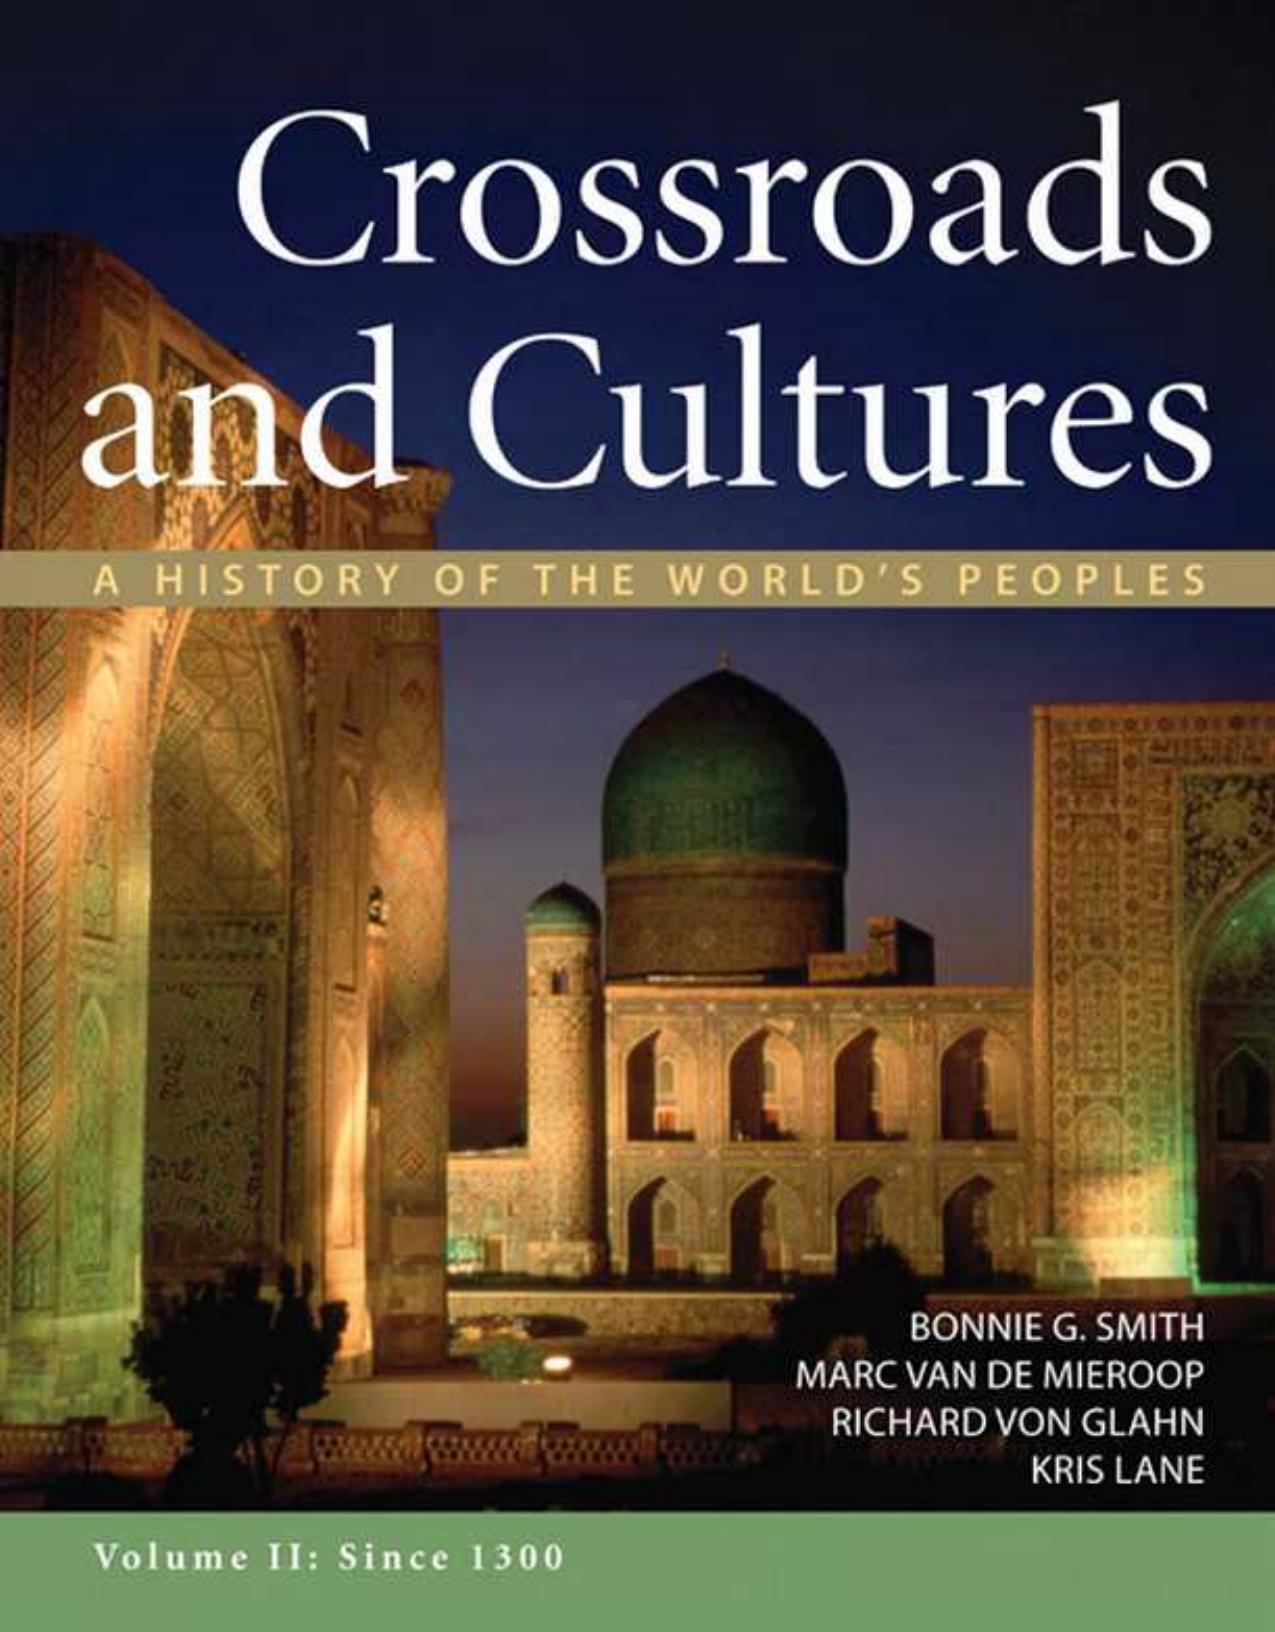 Crossroads and Cultures.jpg